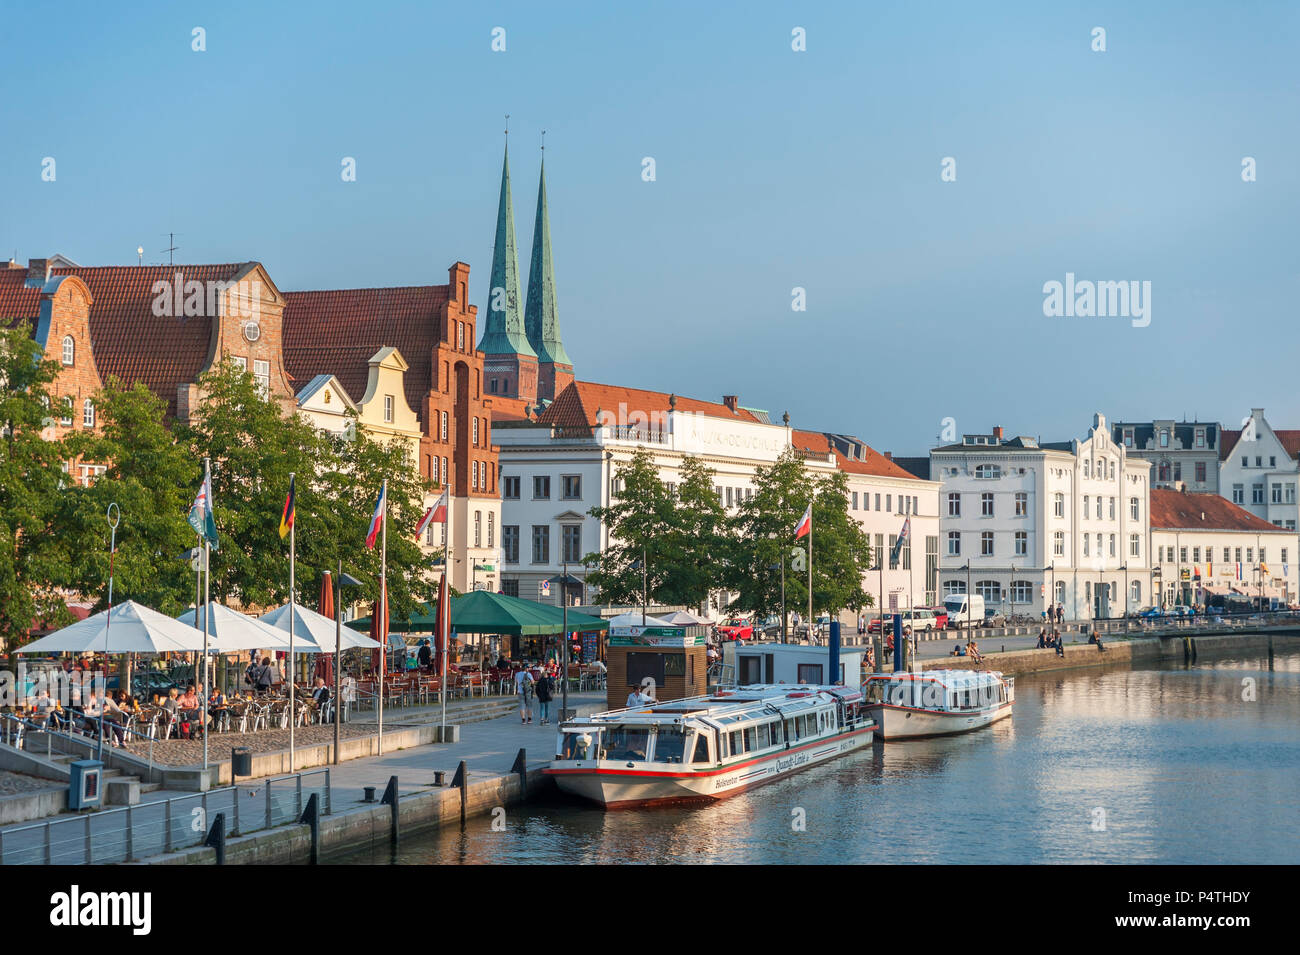 Mooring on the Trave River, Old Town with Cathedral, Lübeck, Schleswig-Holstein, Germany Stock Photo